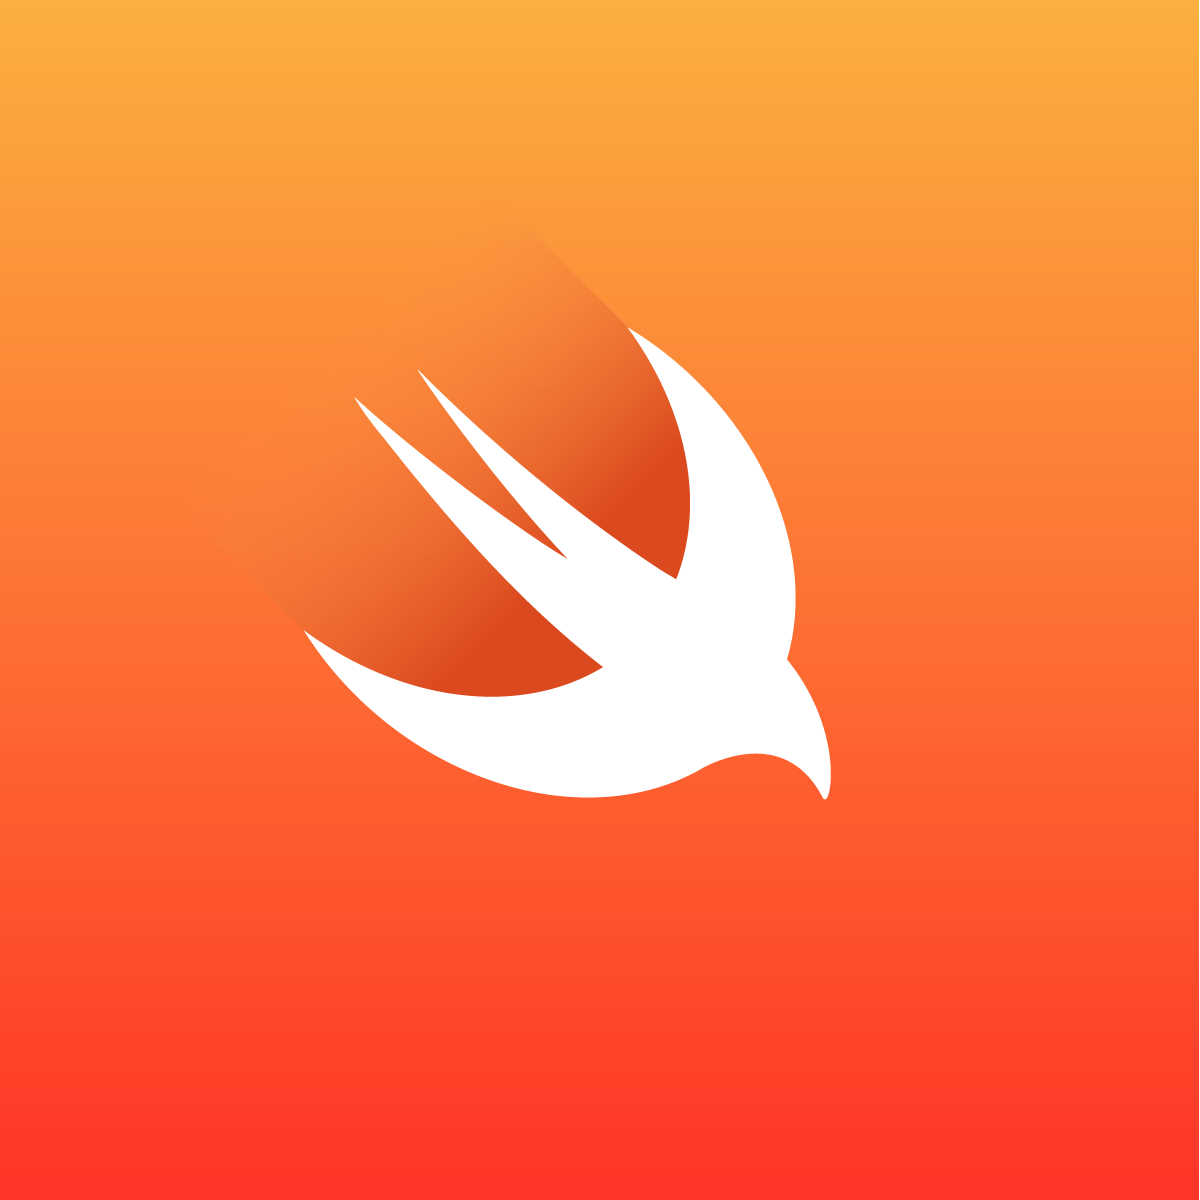 Swift Course Remote Attendee